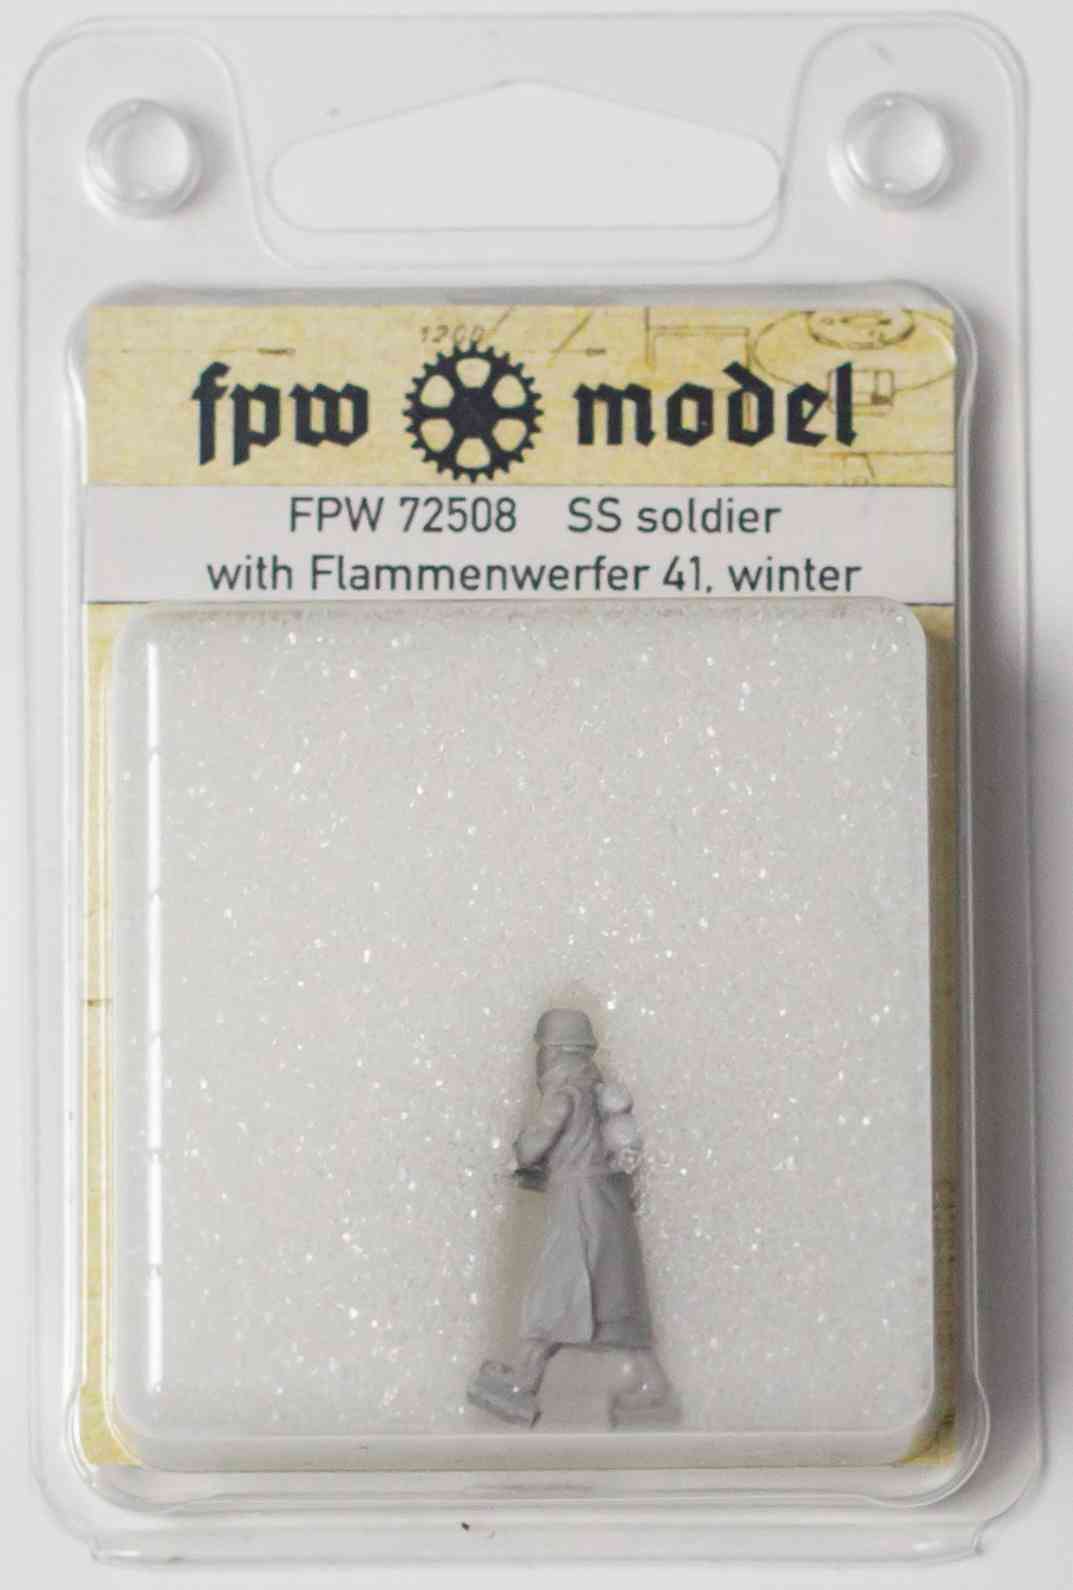 SS soldier with Flammenwerfer 41 - winter